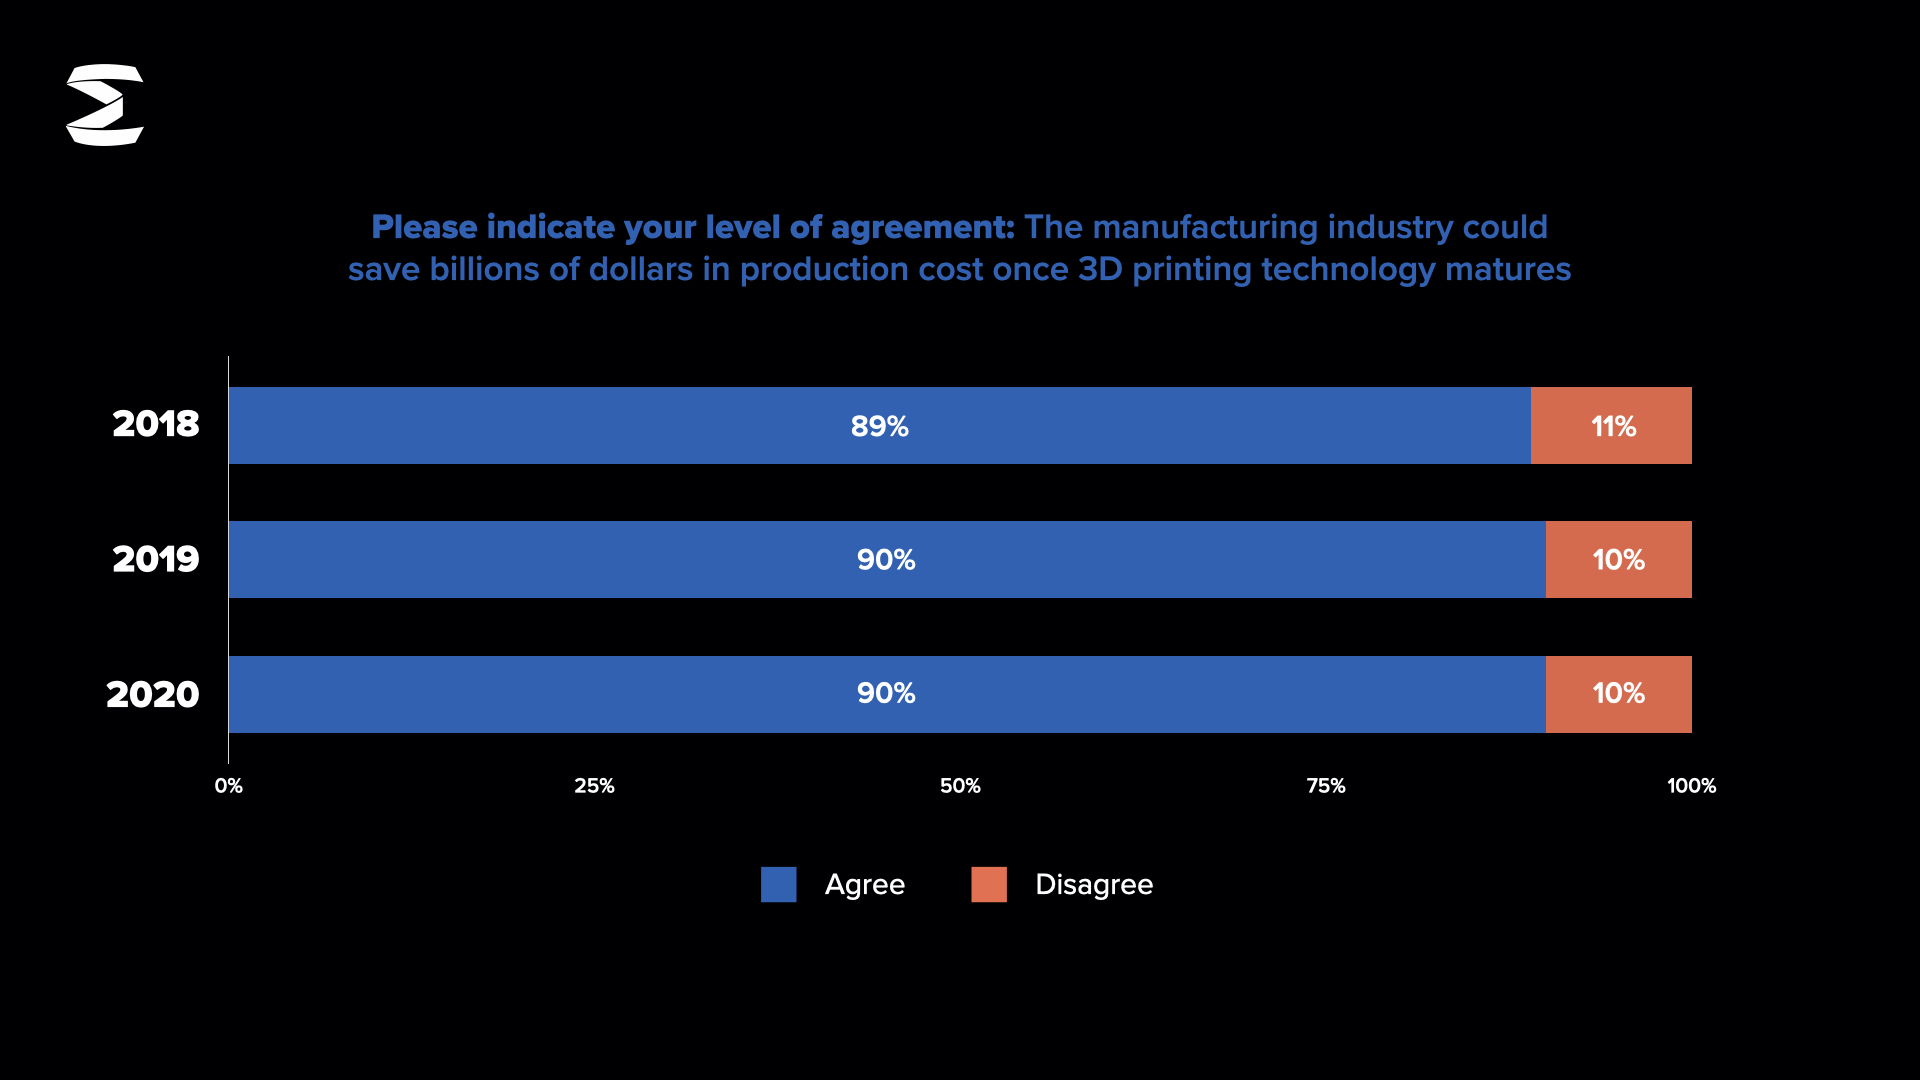 Some 90% of manufacturing executives believed in the potential of industrial-scale 3D printing to save billions in manufacturing costs.